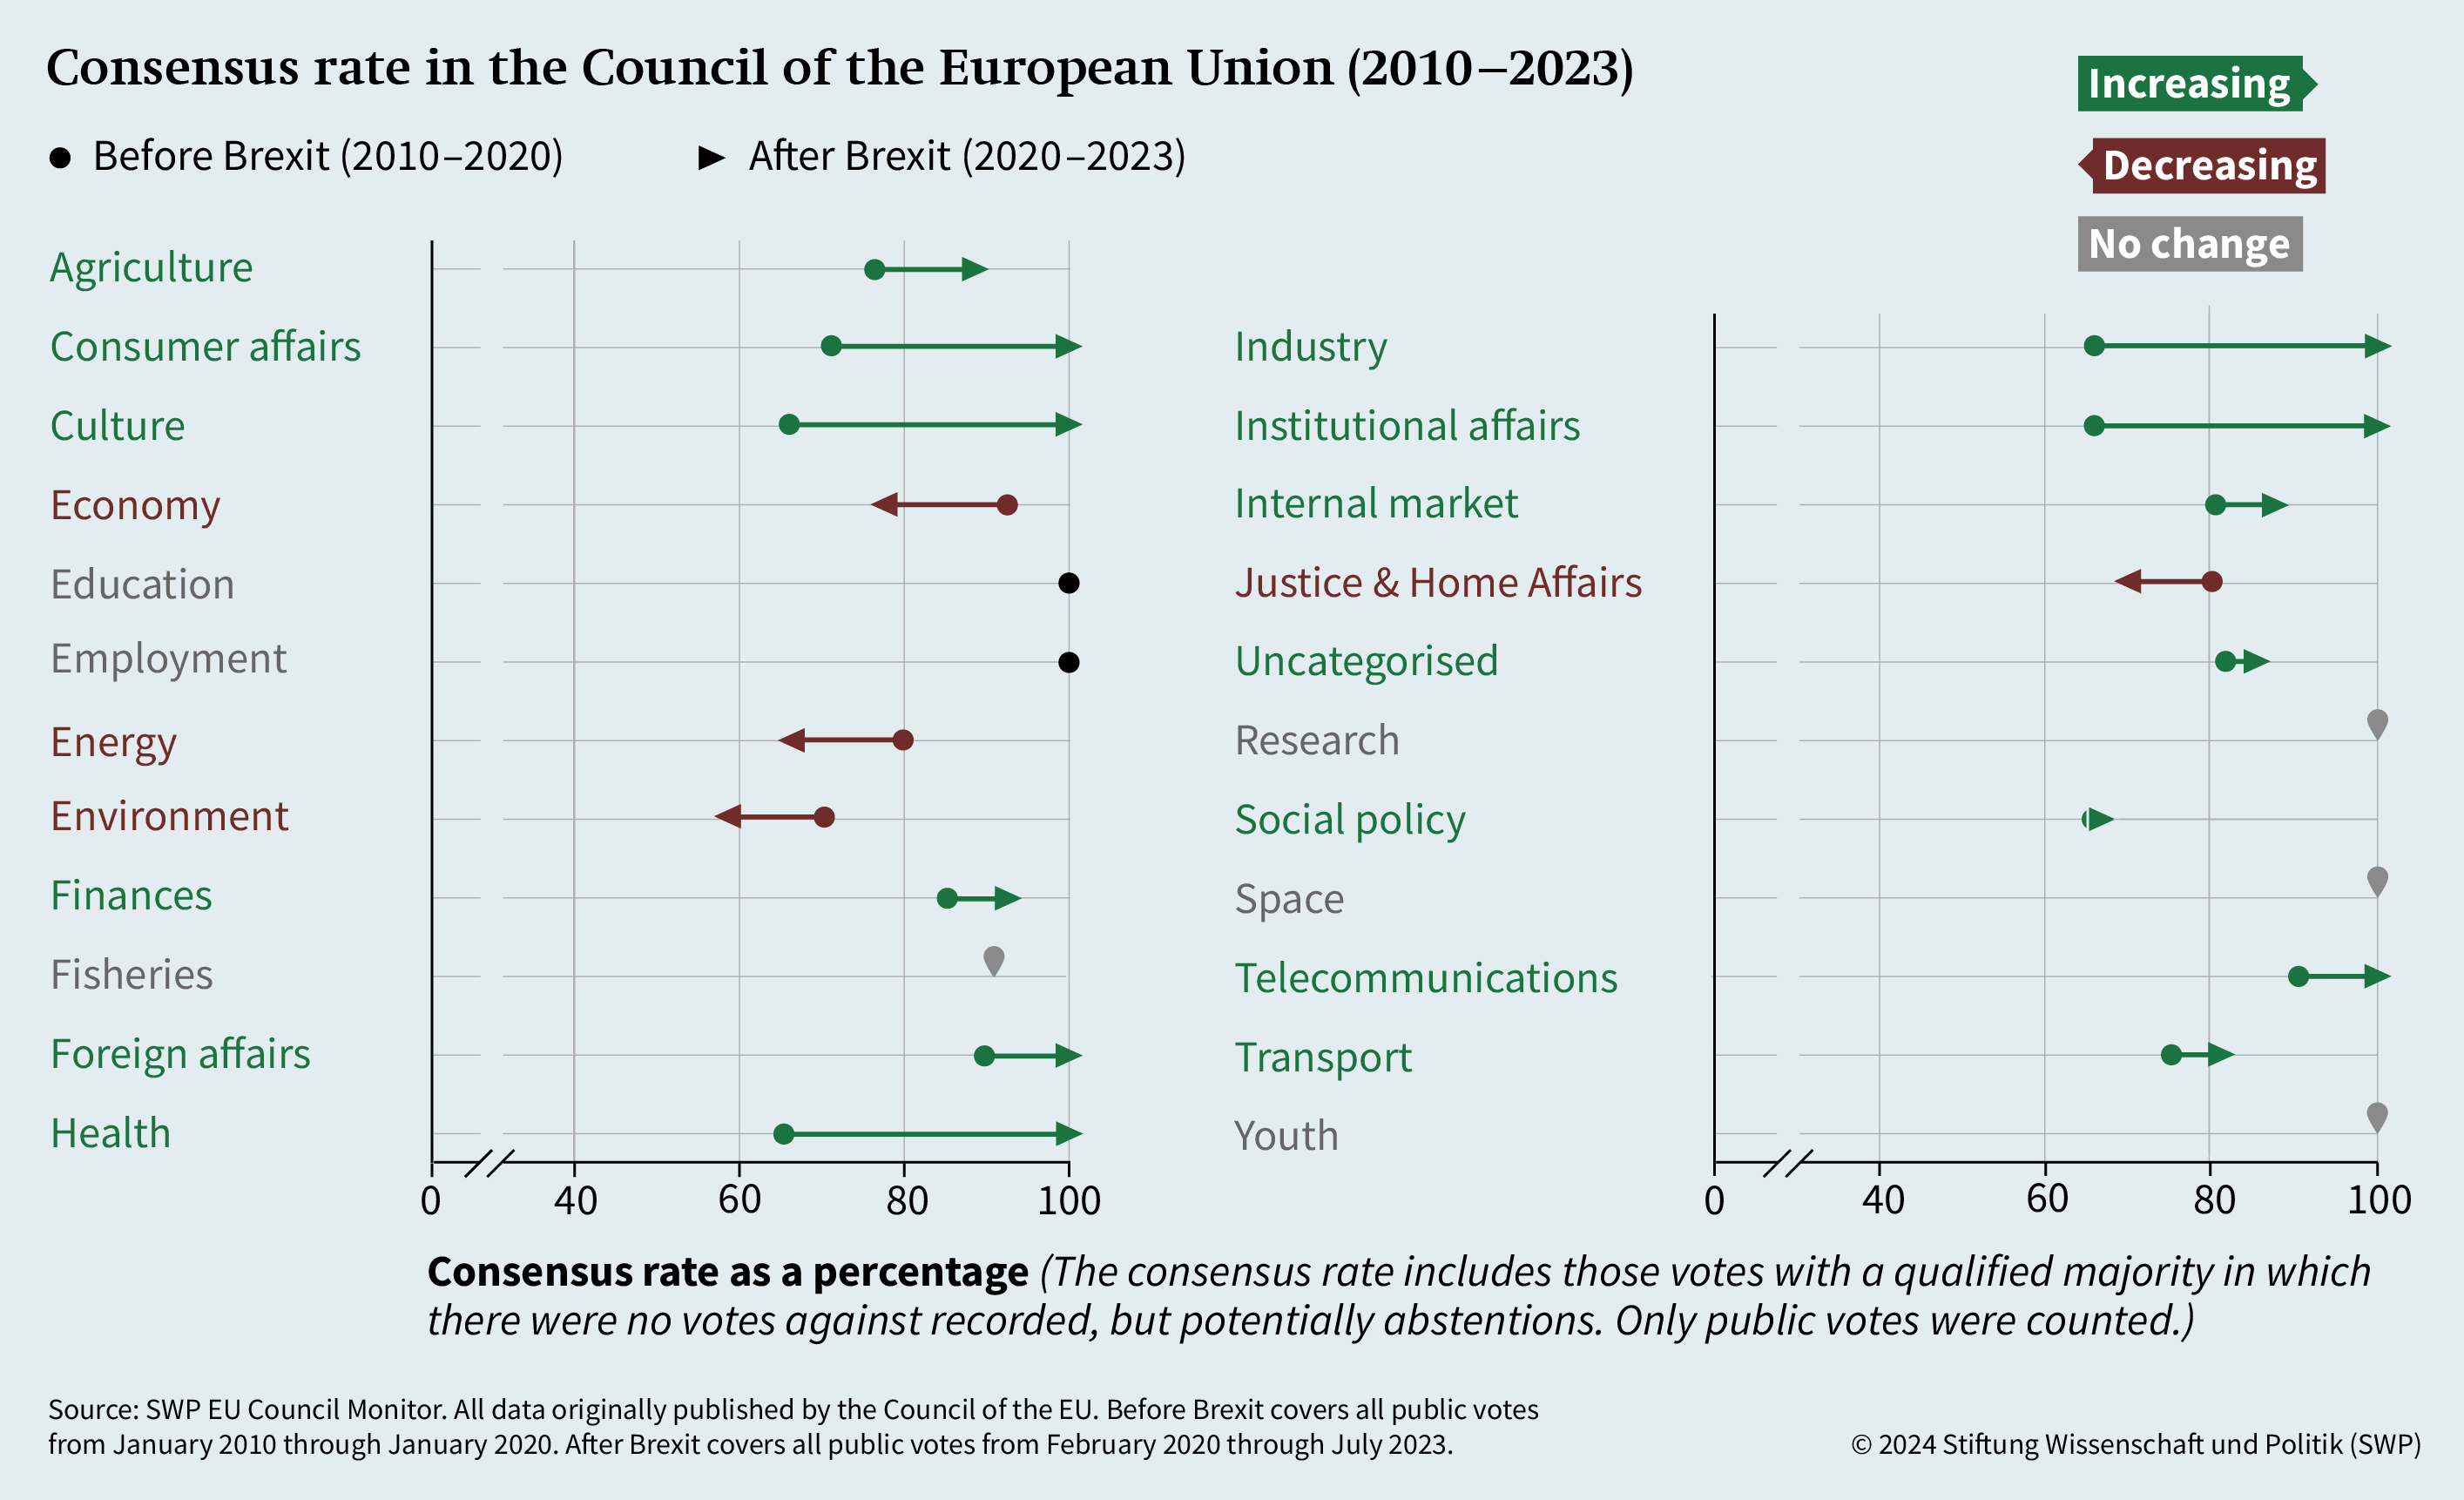 Figure 1: Consensus rate in the Council of the European Union (2010-2023)